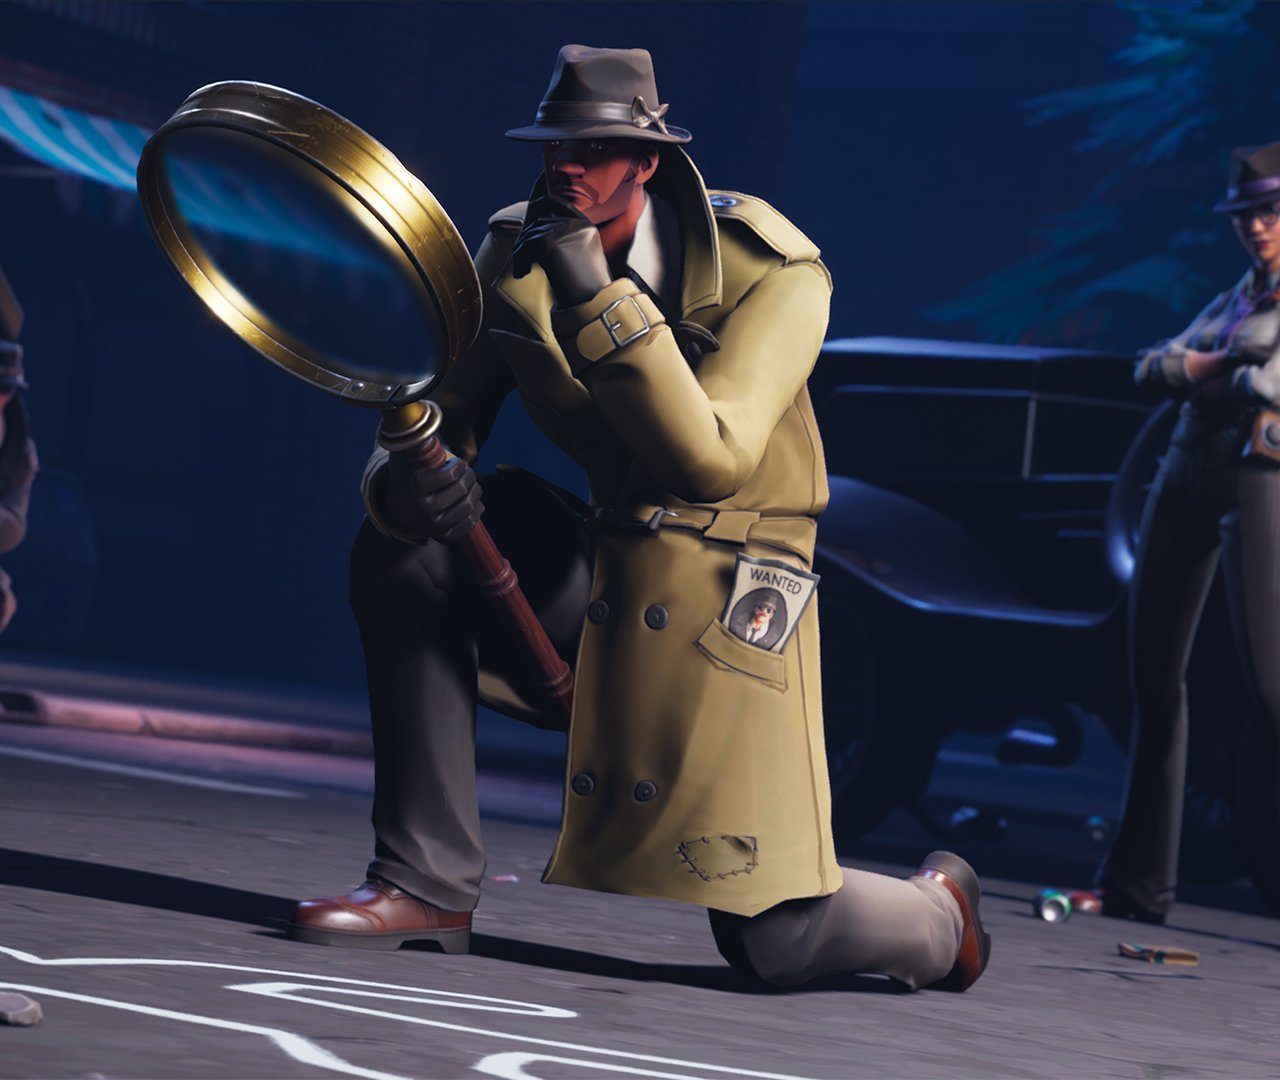 High Definition Wallpaper Of Sleuth From Fortnite Paperpull